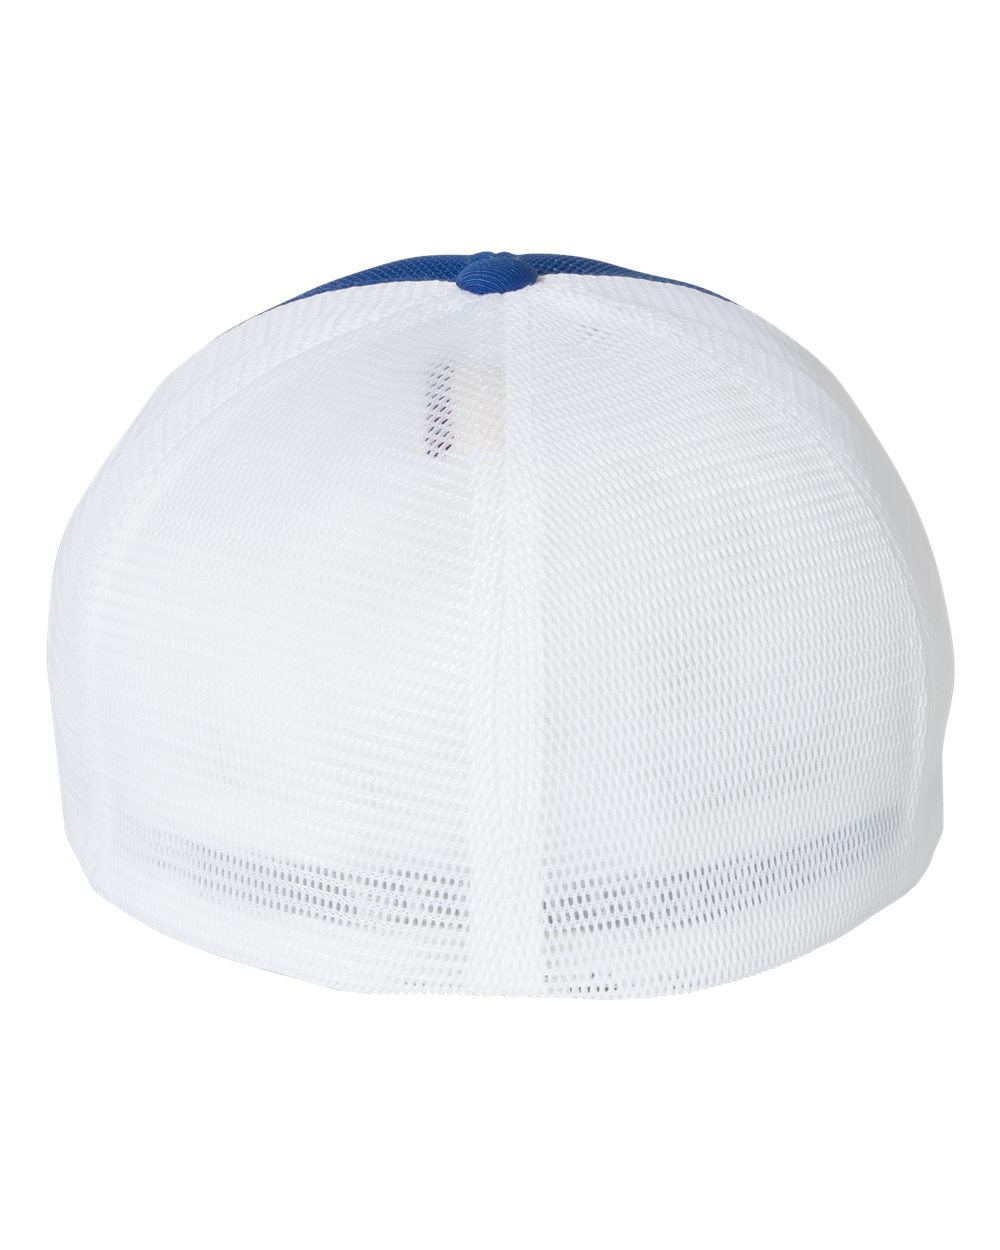 Royal/White Trucker Hat-Fitted